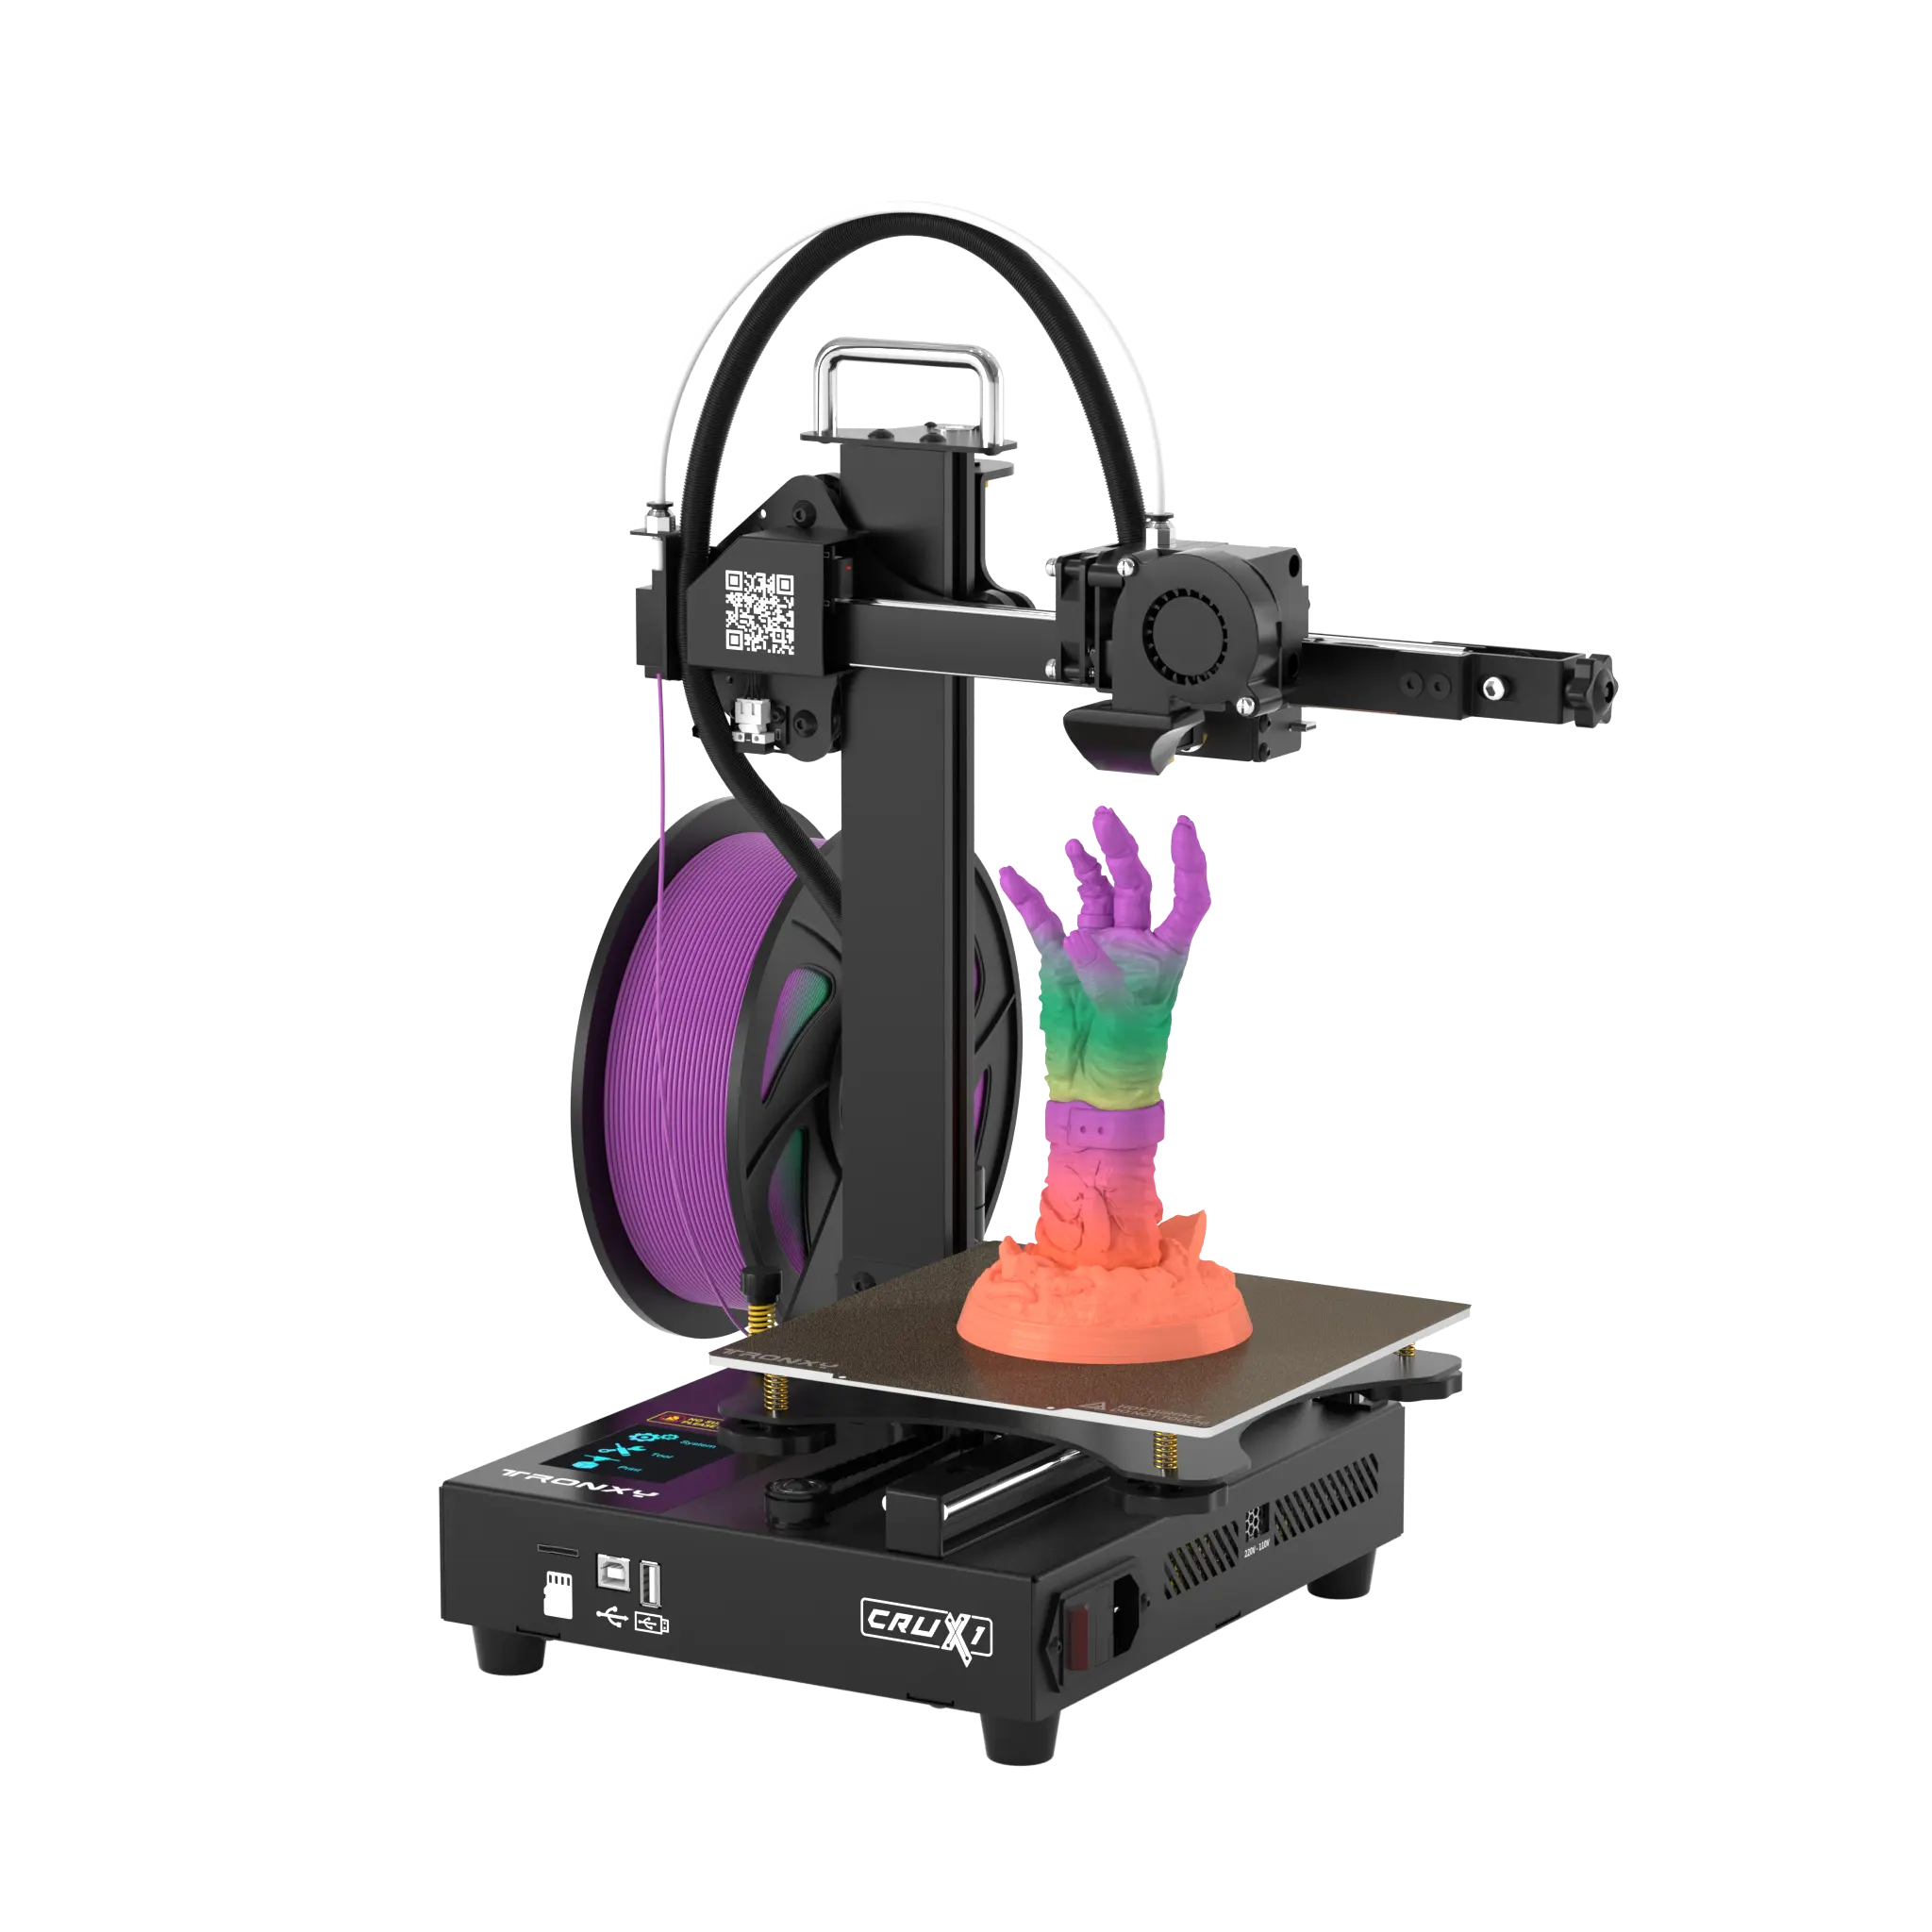 Easy-to-assemble toy 3d printer child desktop Crux 1 direct extruder 3d printer for person